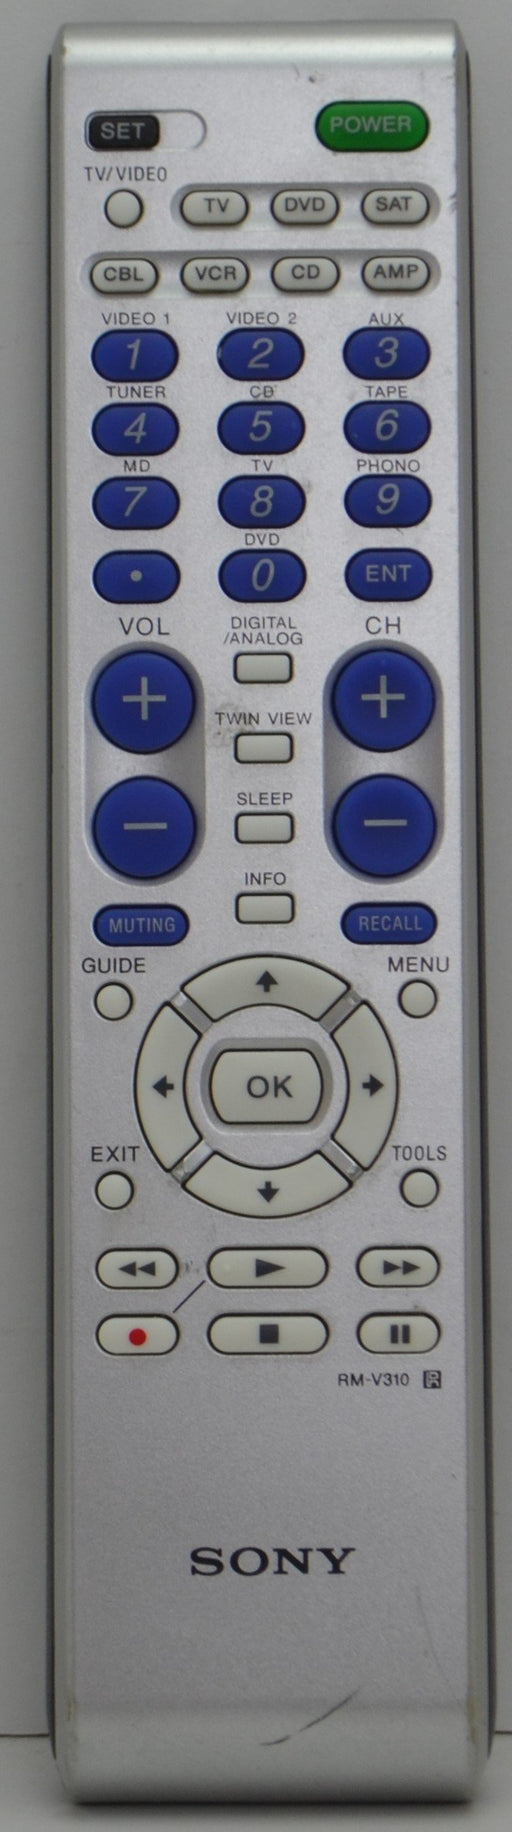 Sony RM-V310 Universal Remote Control for TV / DVD / CABLE / AMP / CD / TAPE / AUX / SAT-Remote-SpenCertified-refurbished-vintage-electonics